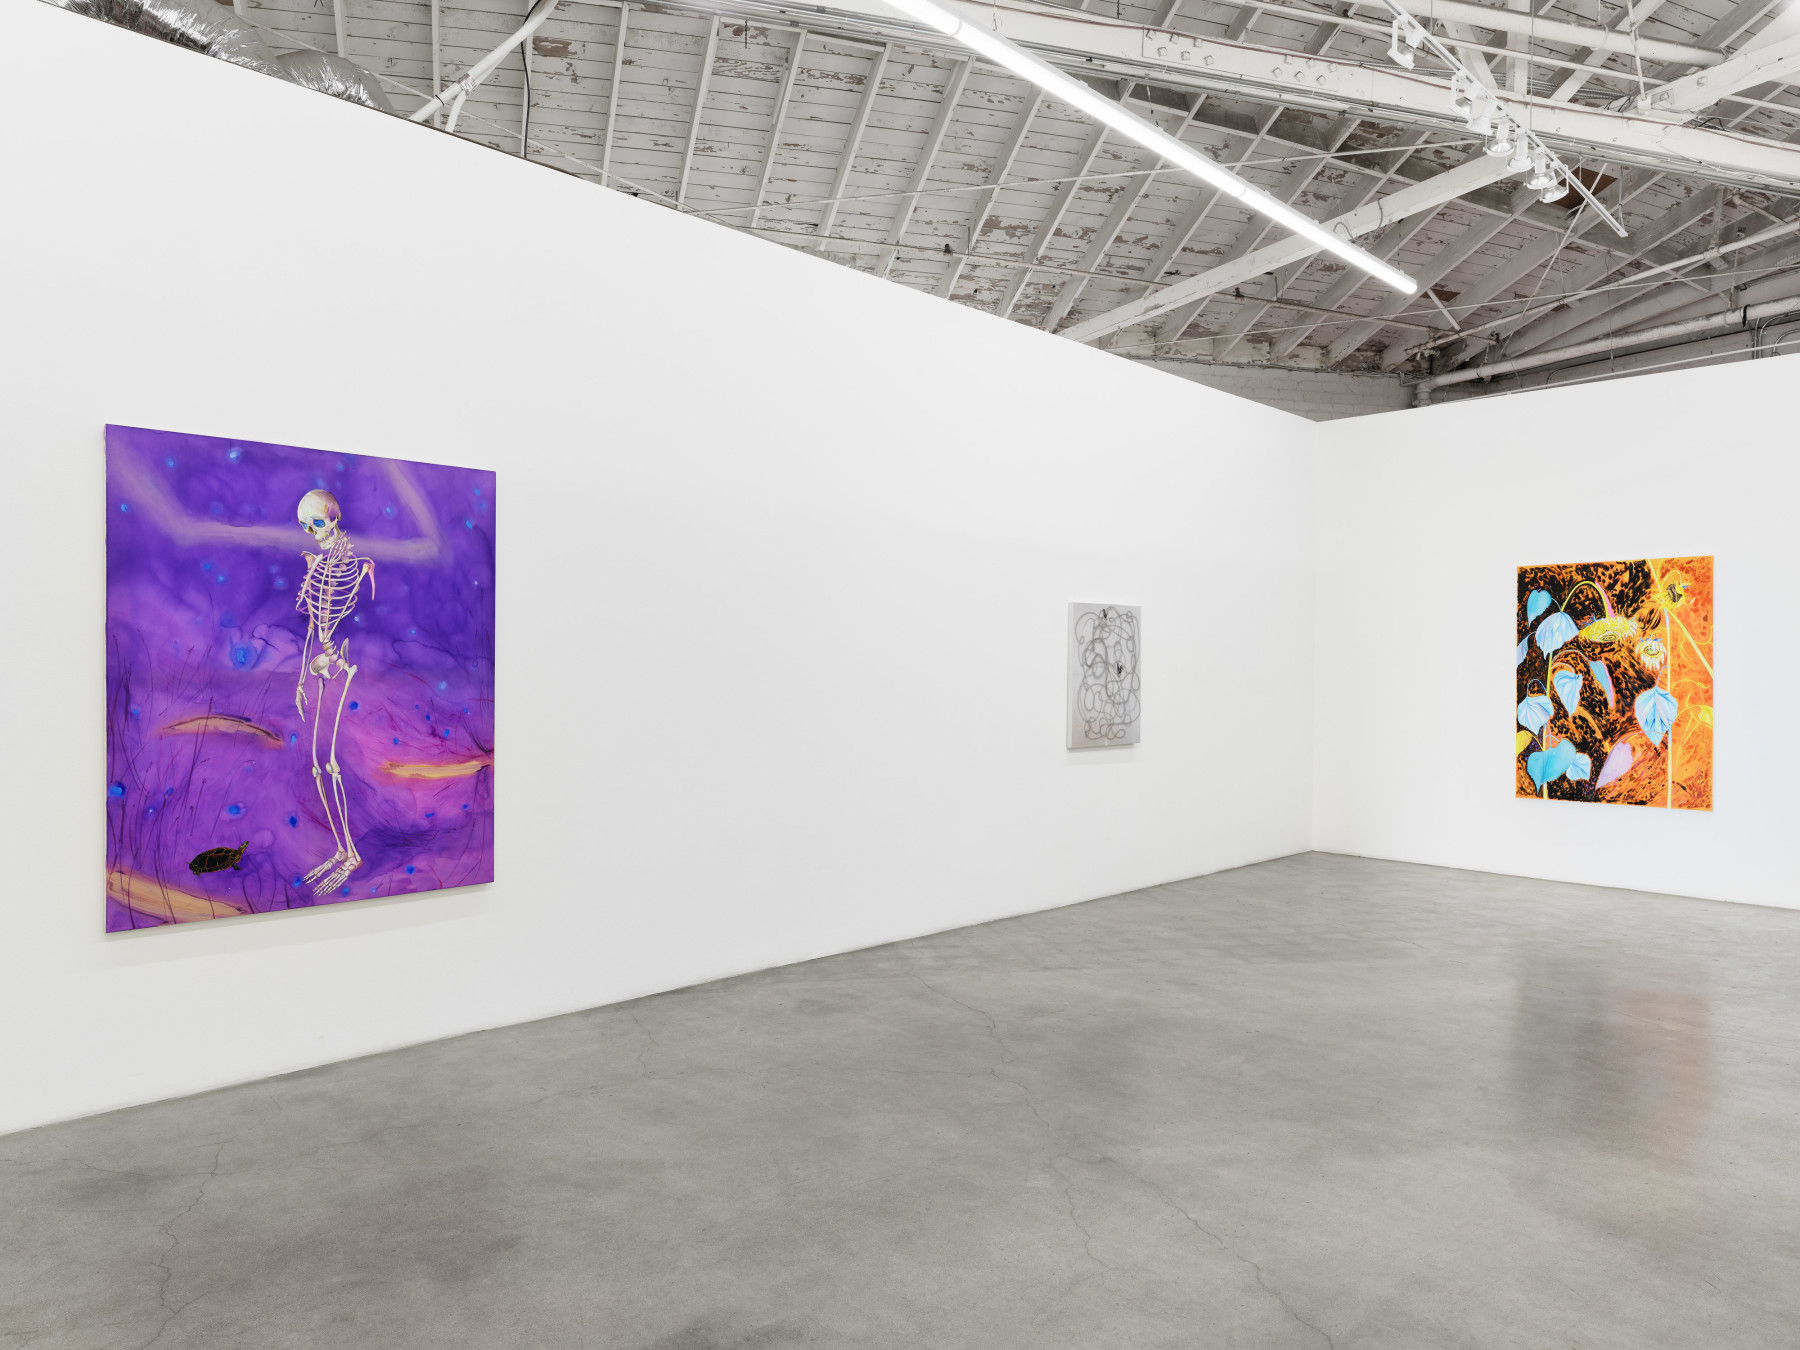 Paul Heyer, Naked, exhibition installation view, 2021